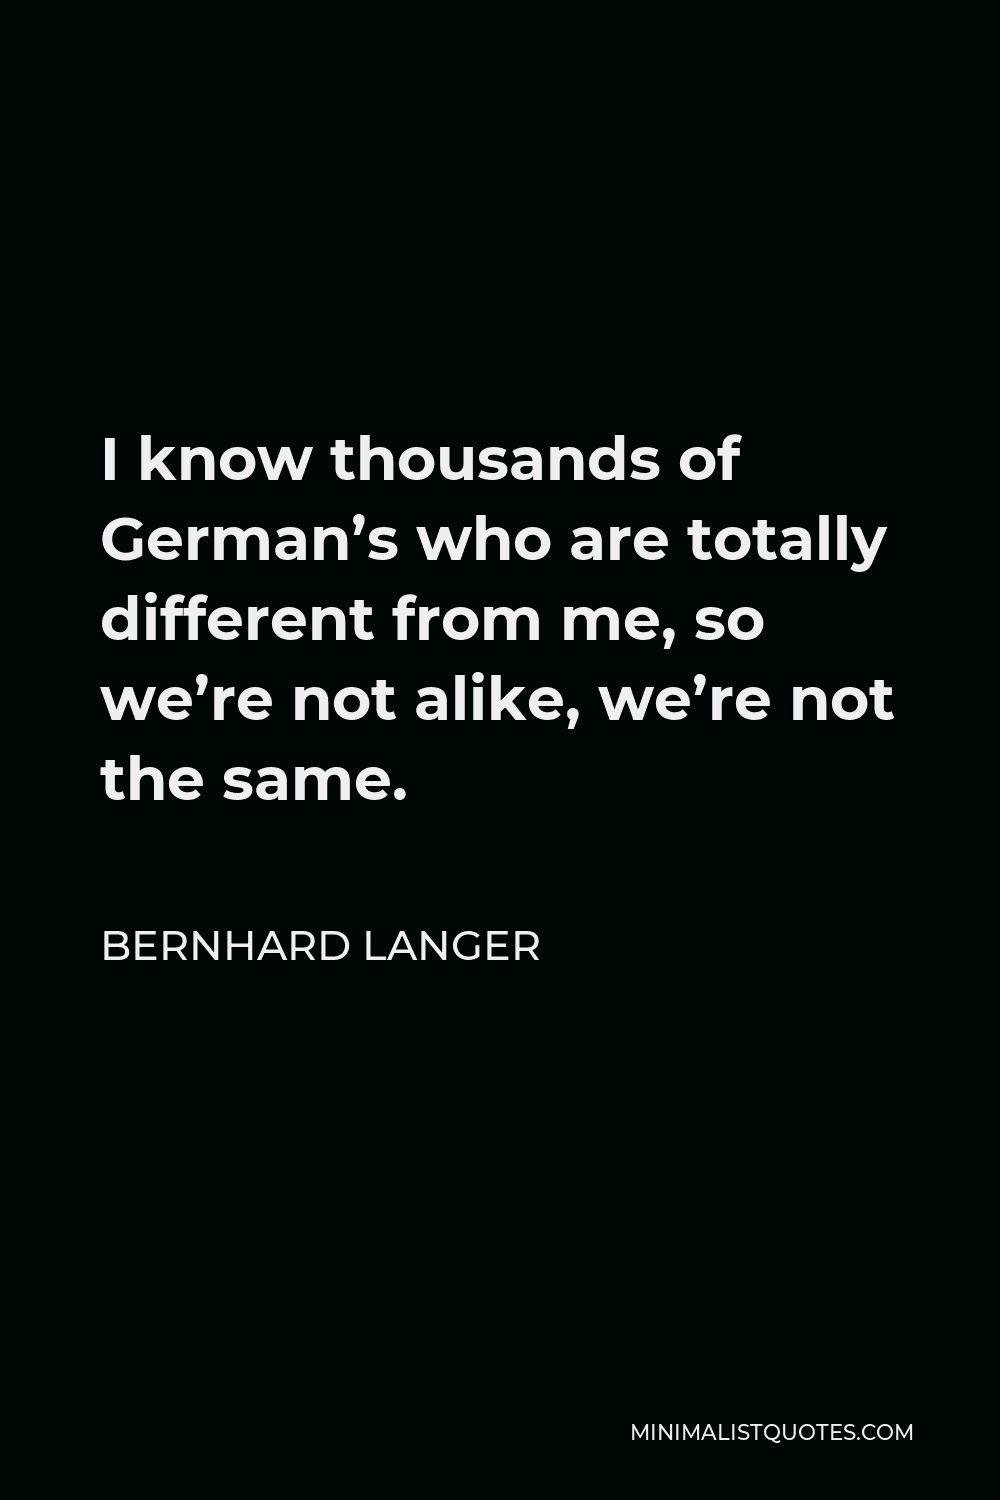 Bernhard Langer Quote - I know thousands of German’s who are totally different from me, so we’re not alike, we’re not the same.